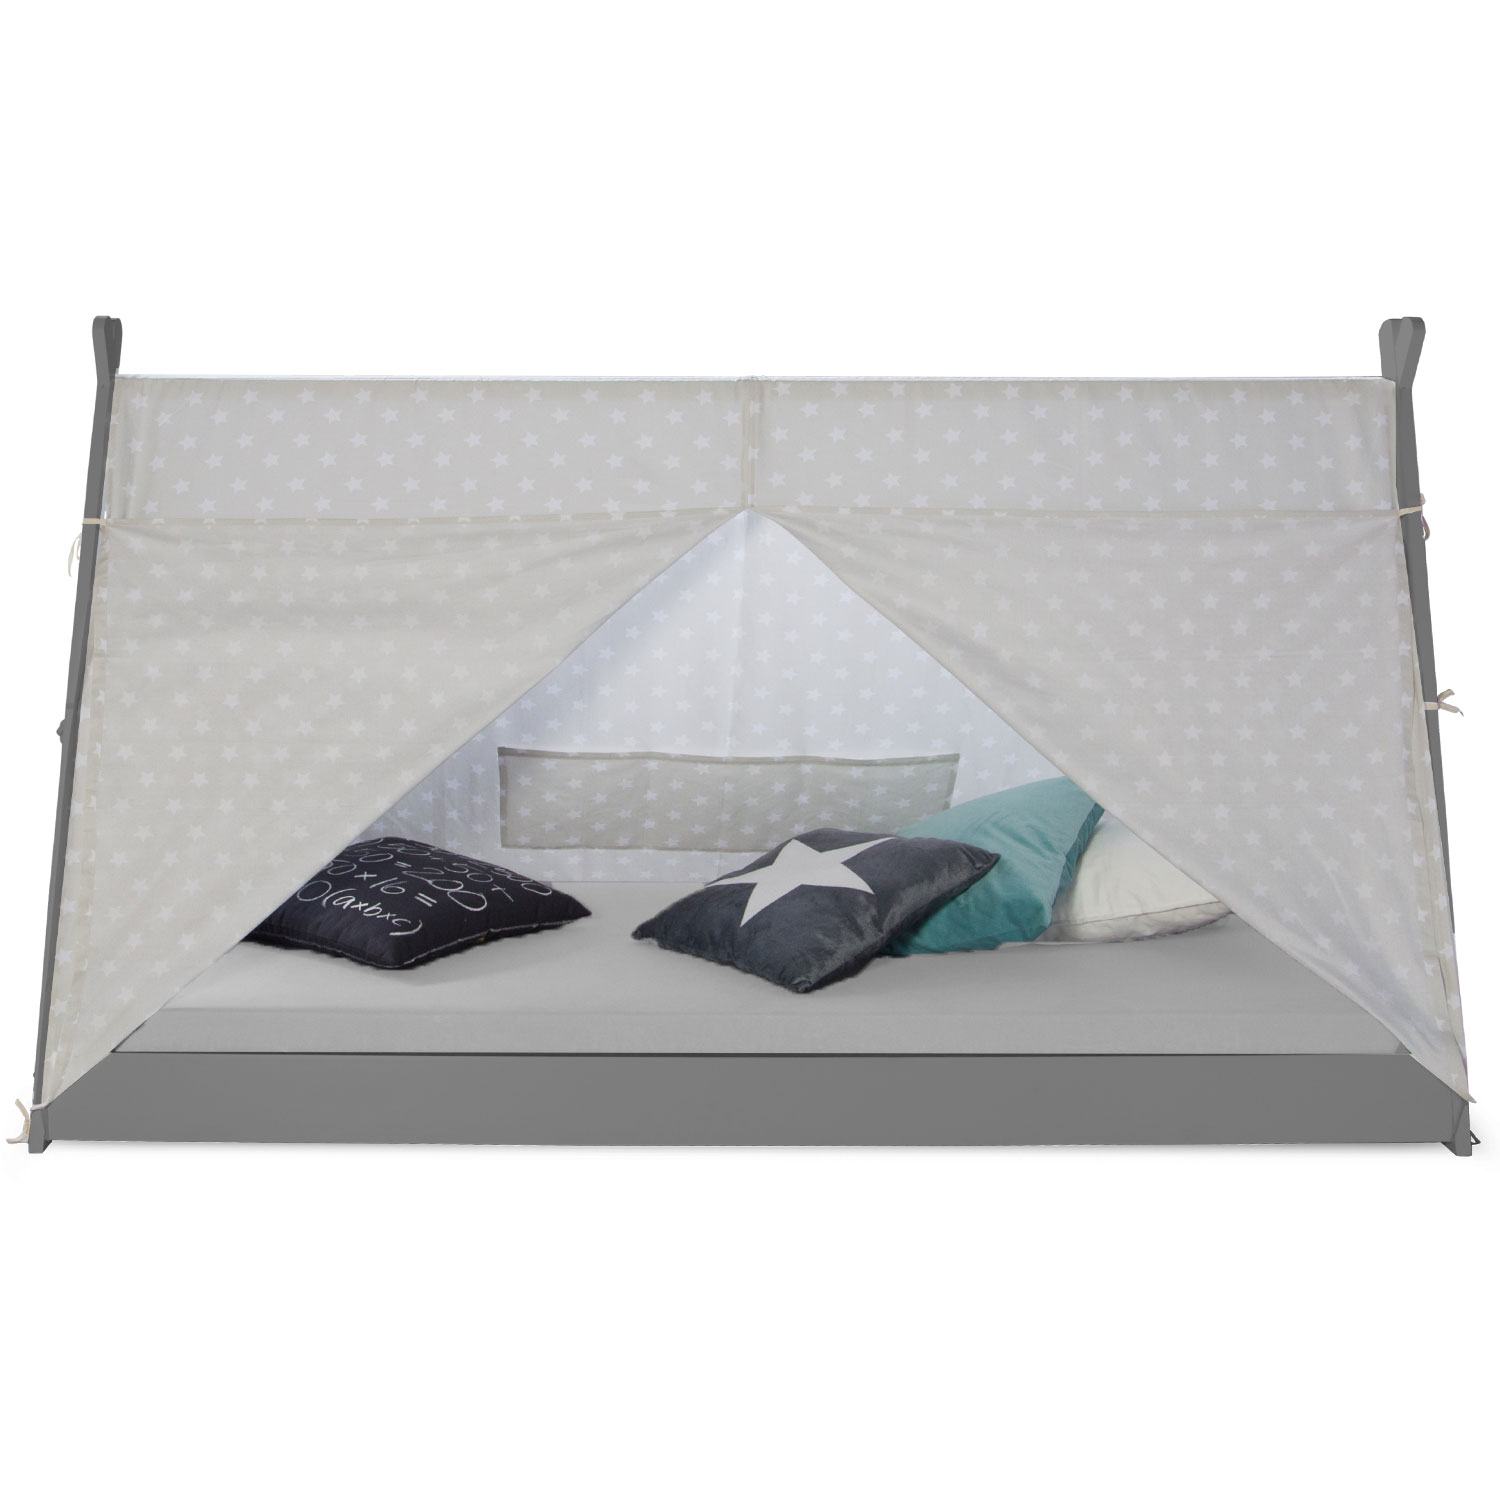 Children bed tipi tent bed 90x200 youth bed grey canvas stars